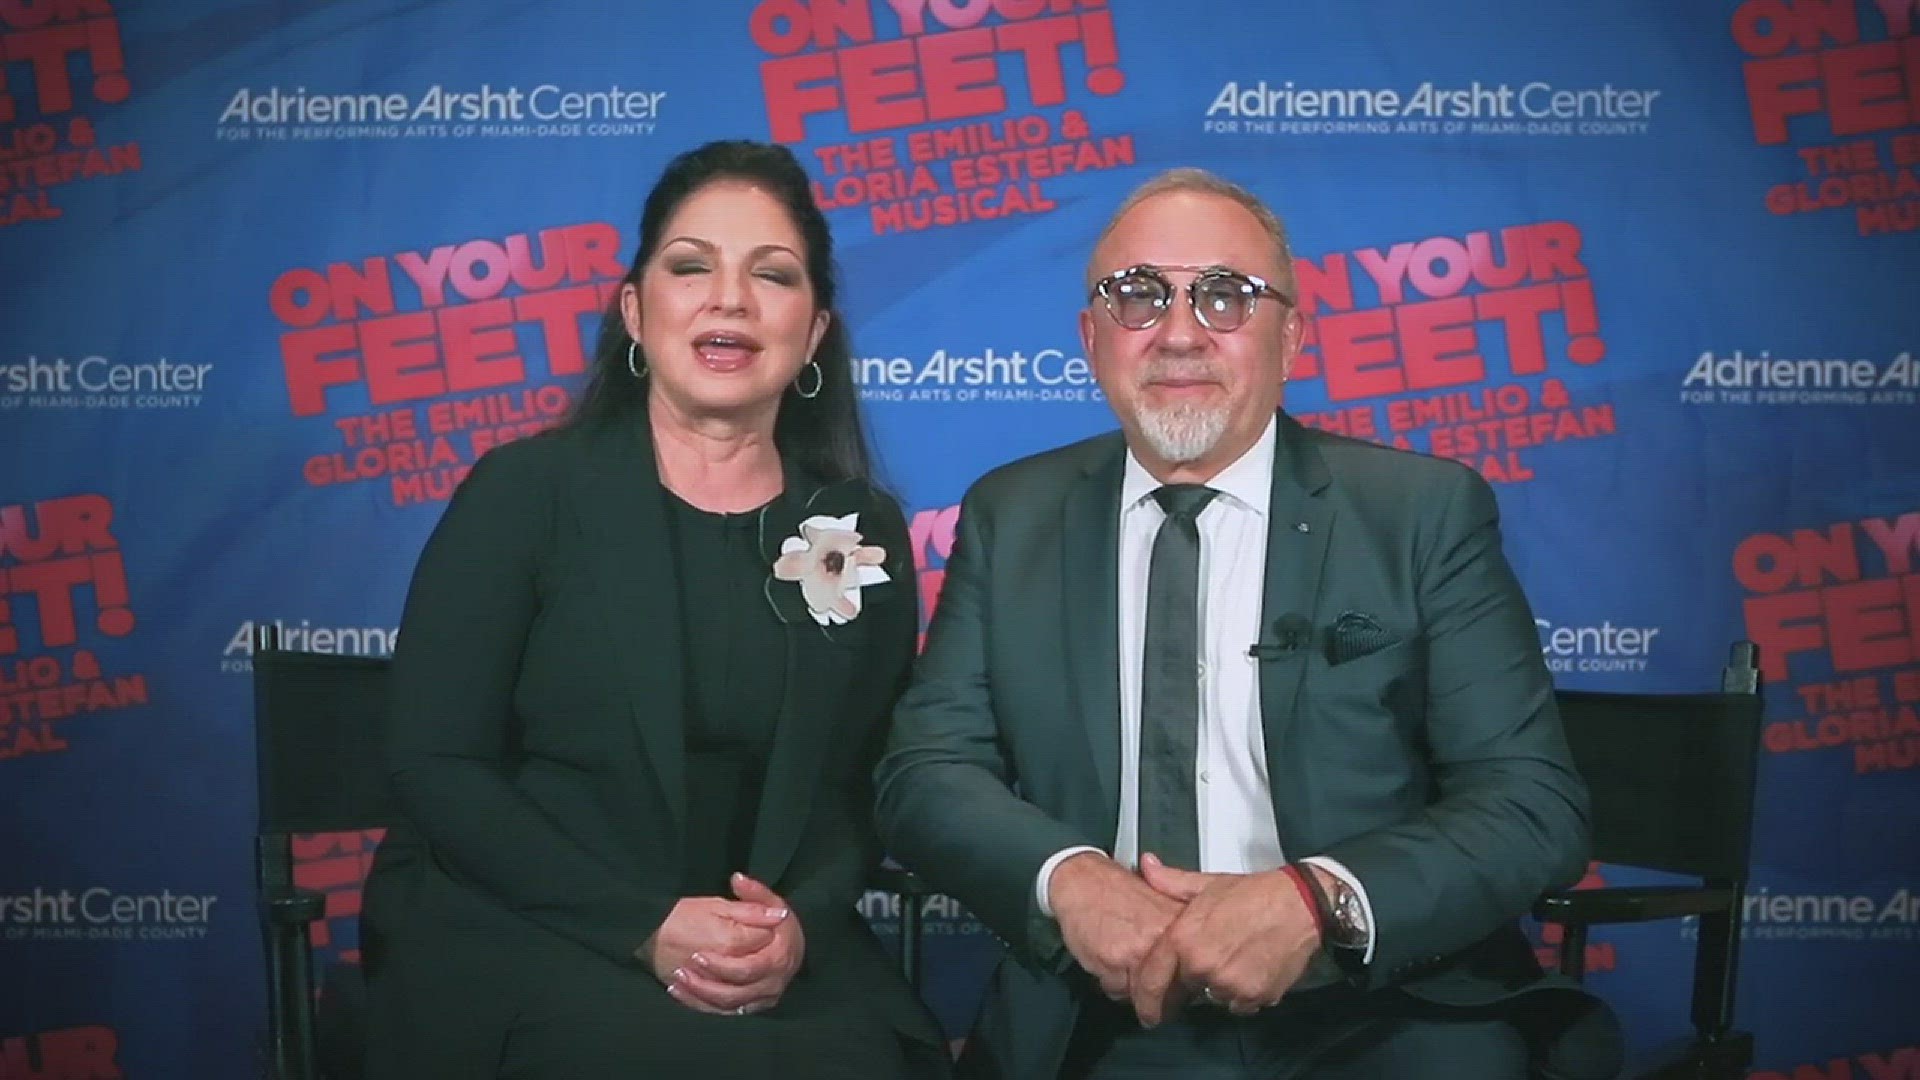 Gloria Estefan welcomes "On Your Feet" to Dallas